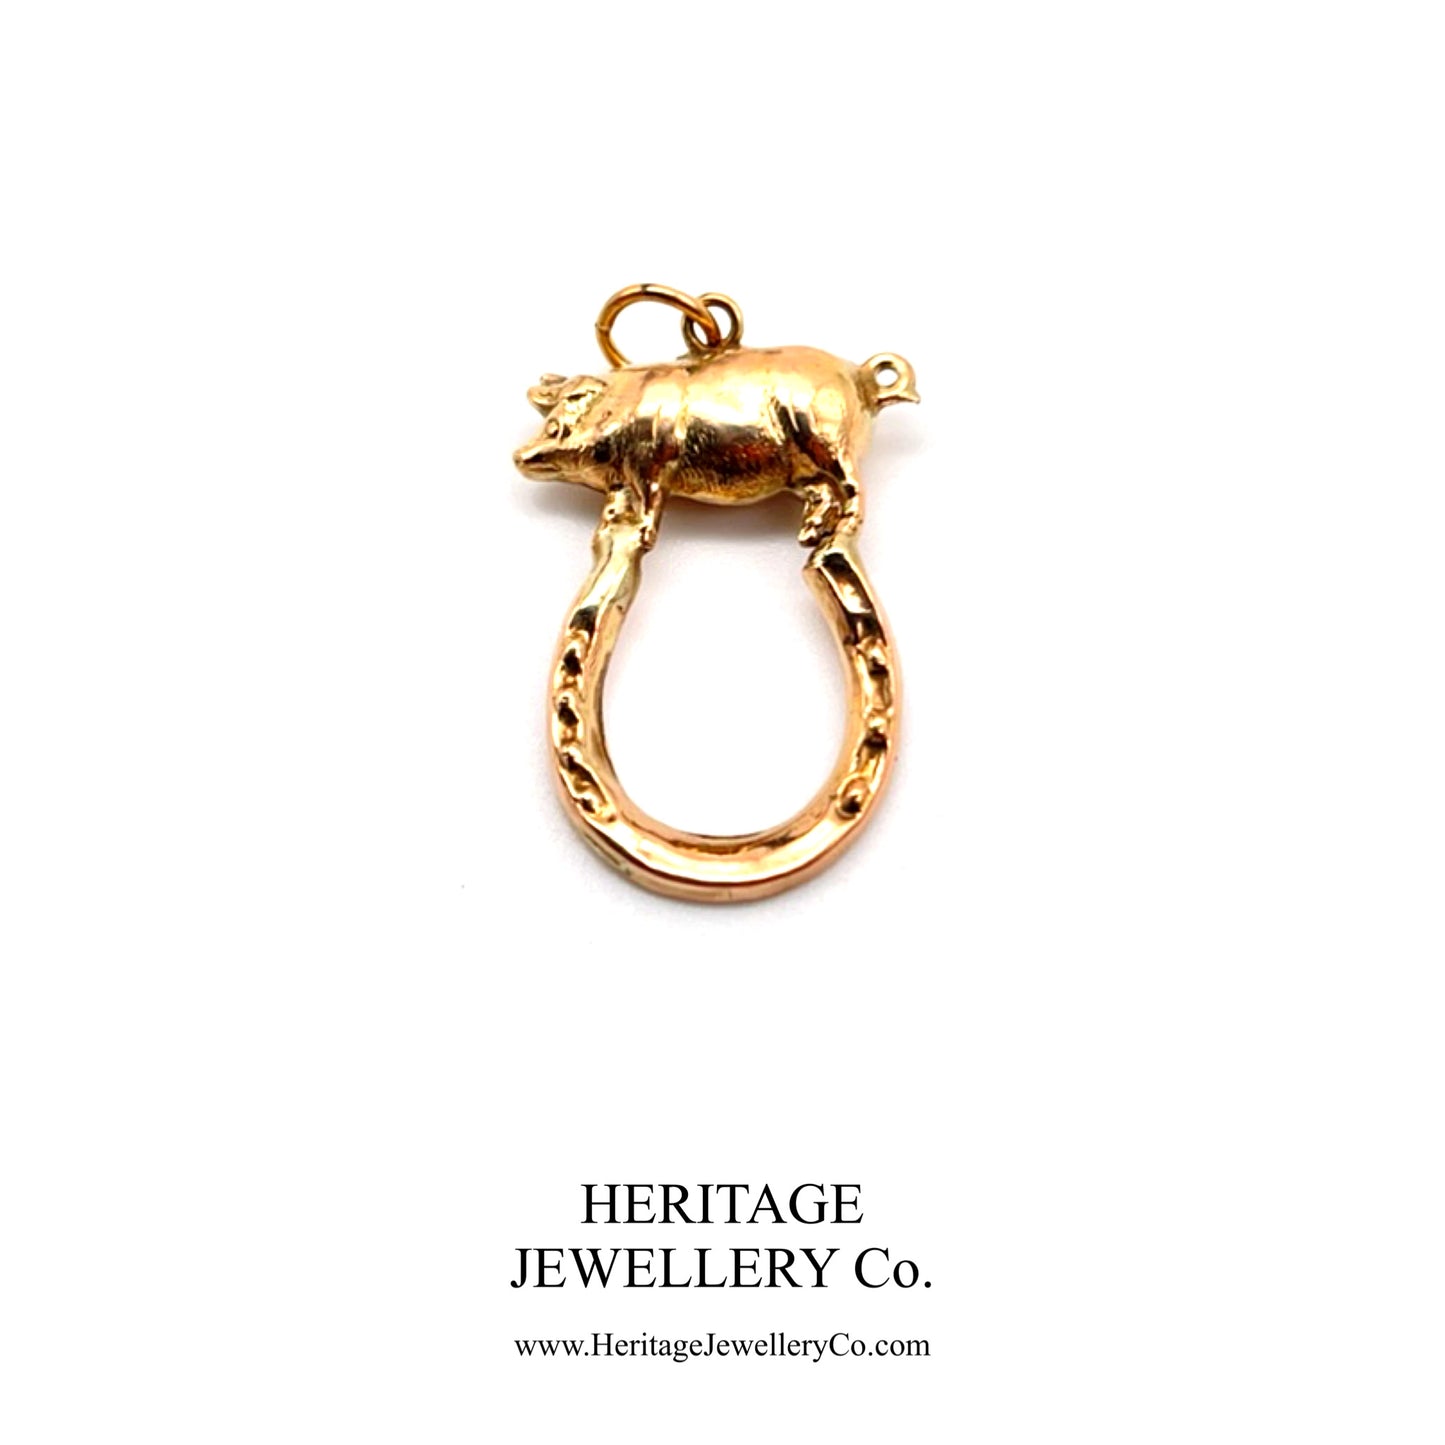 Victorian Pig and Horseshoe Lucky Pedant / Charm (9ct gold; c.1890-1900)